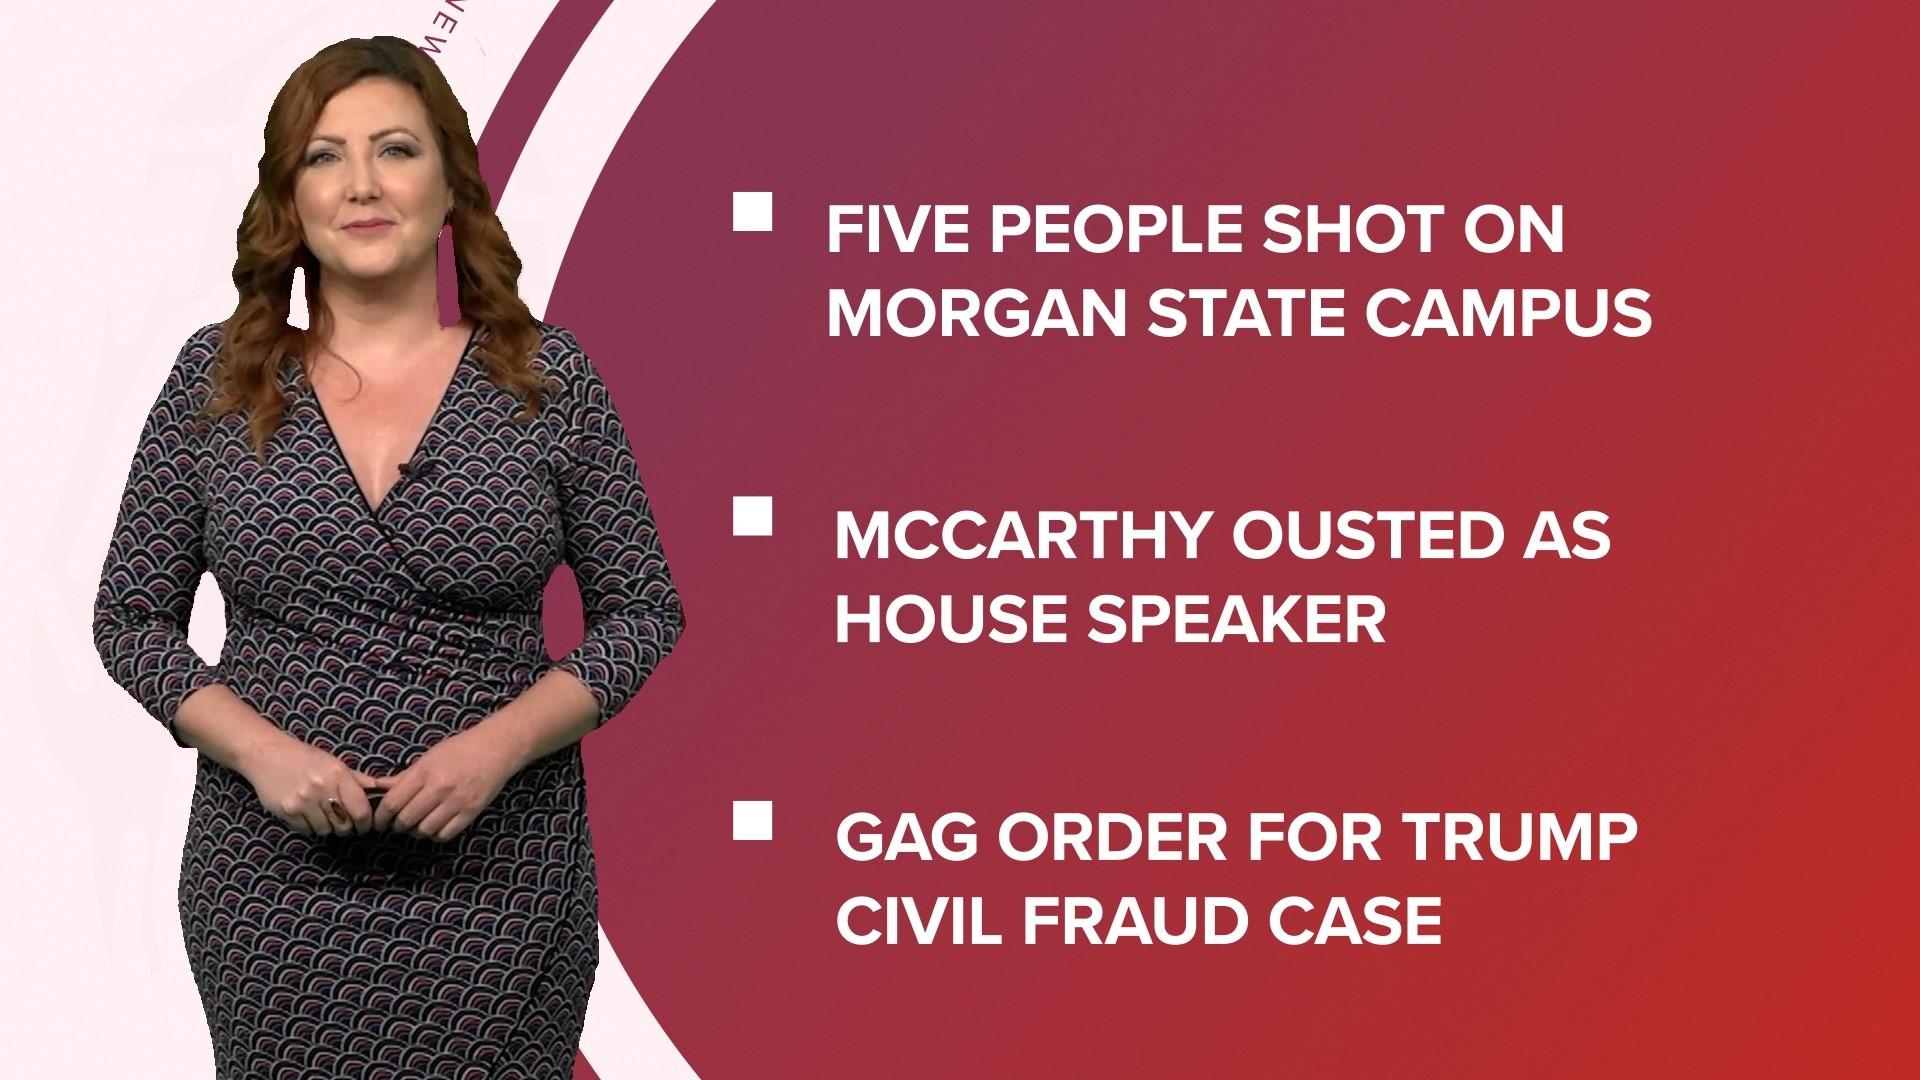 A look at what is happening in the news from Kevin McCarthy historically voted out as House Speaker to Mariah Carey going on a special holiday tour.